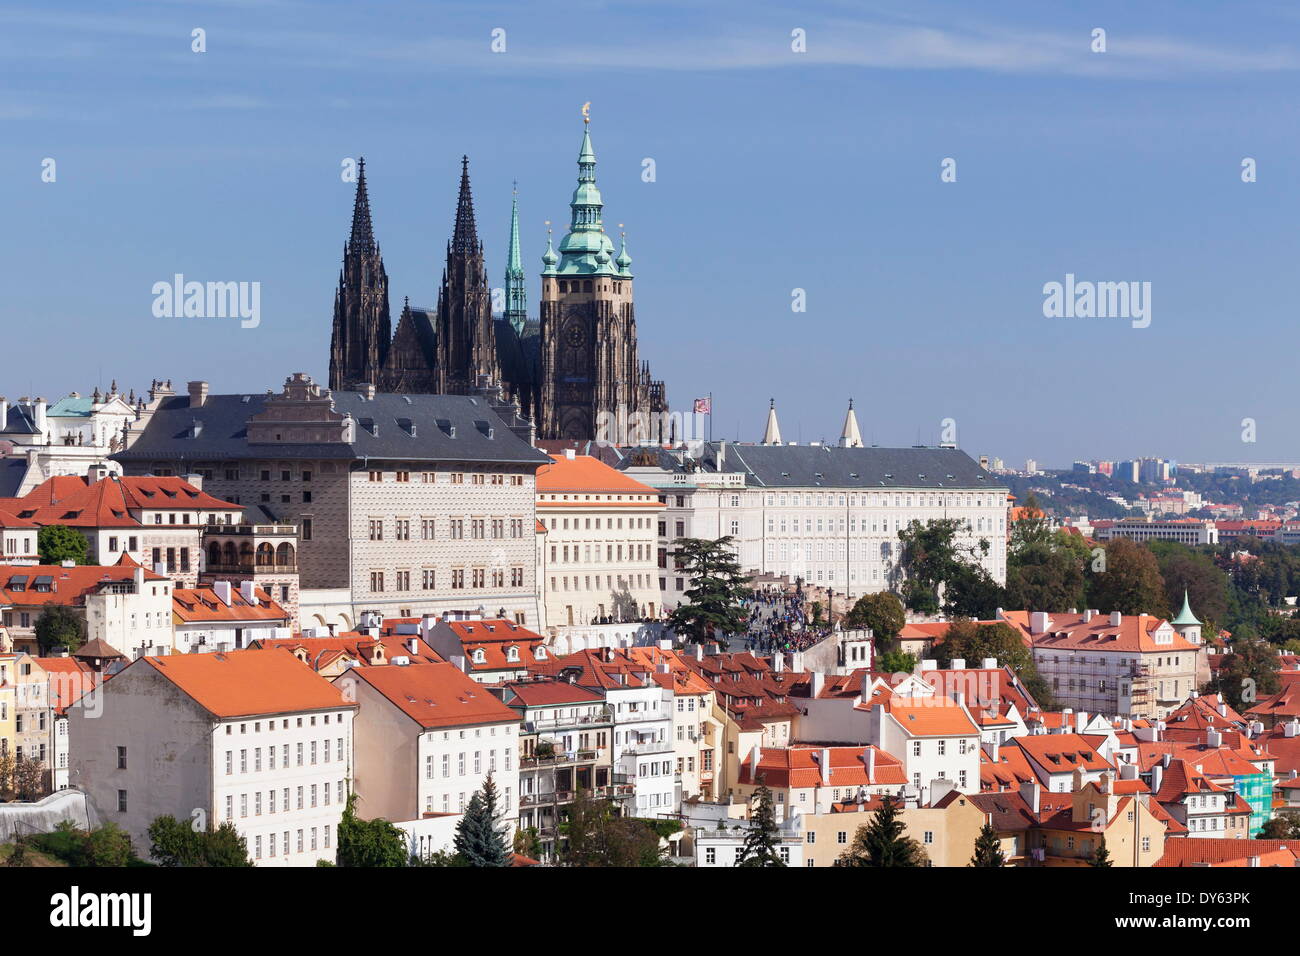 Castle District Hradcany with St. Vitus Cathedral and Royal Palace seen from Petrin Hill, UNESCO Site, Prague, Czech Republic Stock Photo